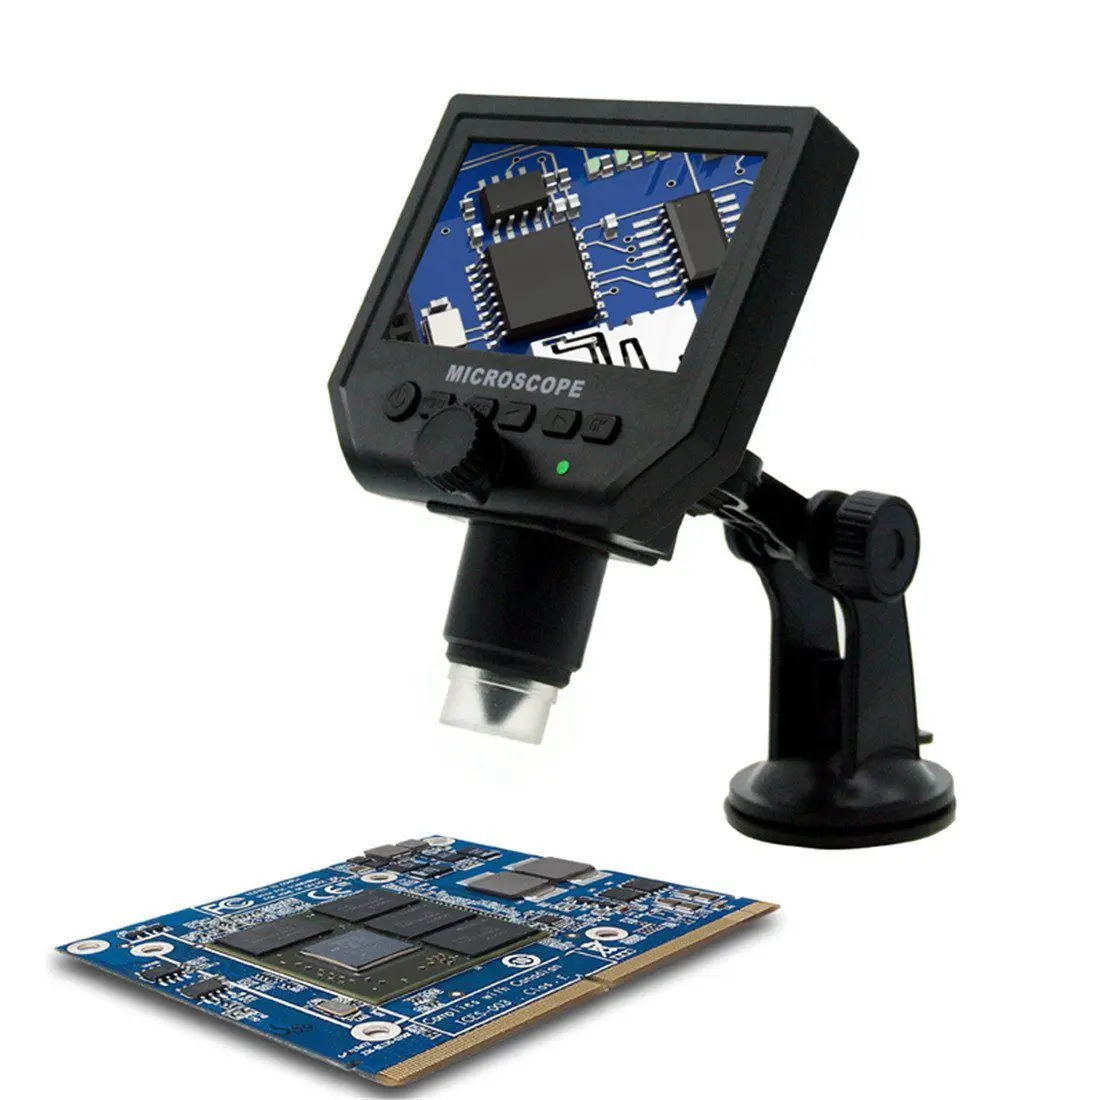 MYLB-LCD Digital USB Microscope 4.3 inch Magnifier with 1-600X Continuous Magnification Zoom 3.6MP